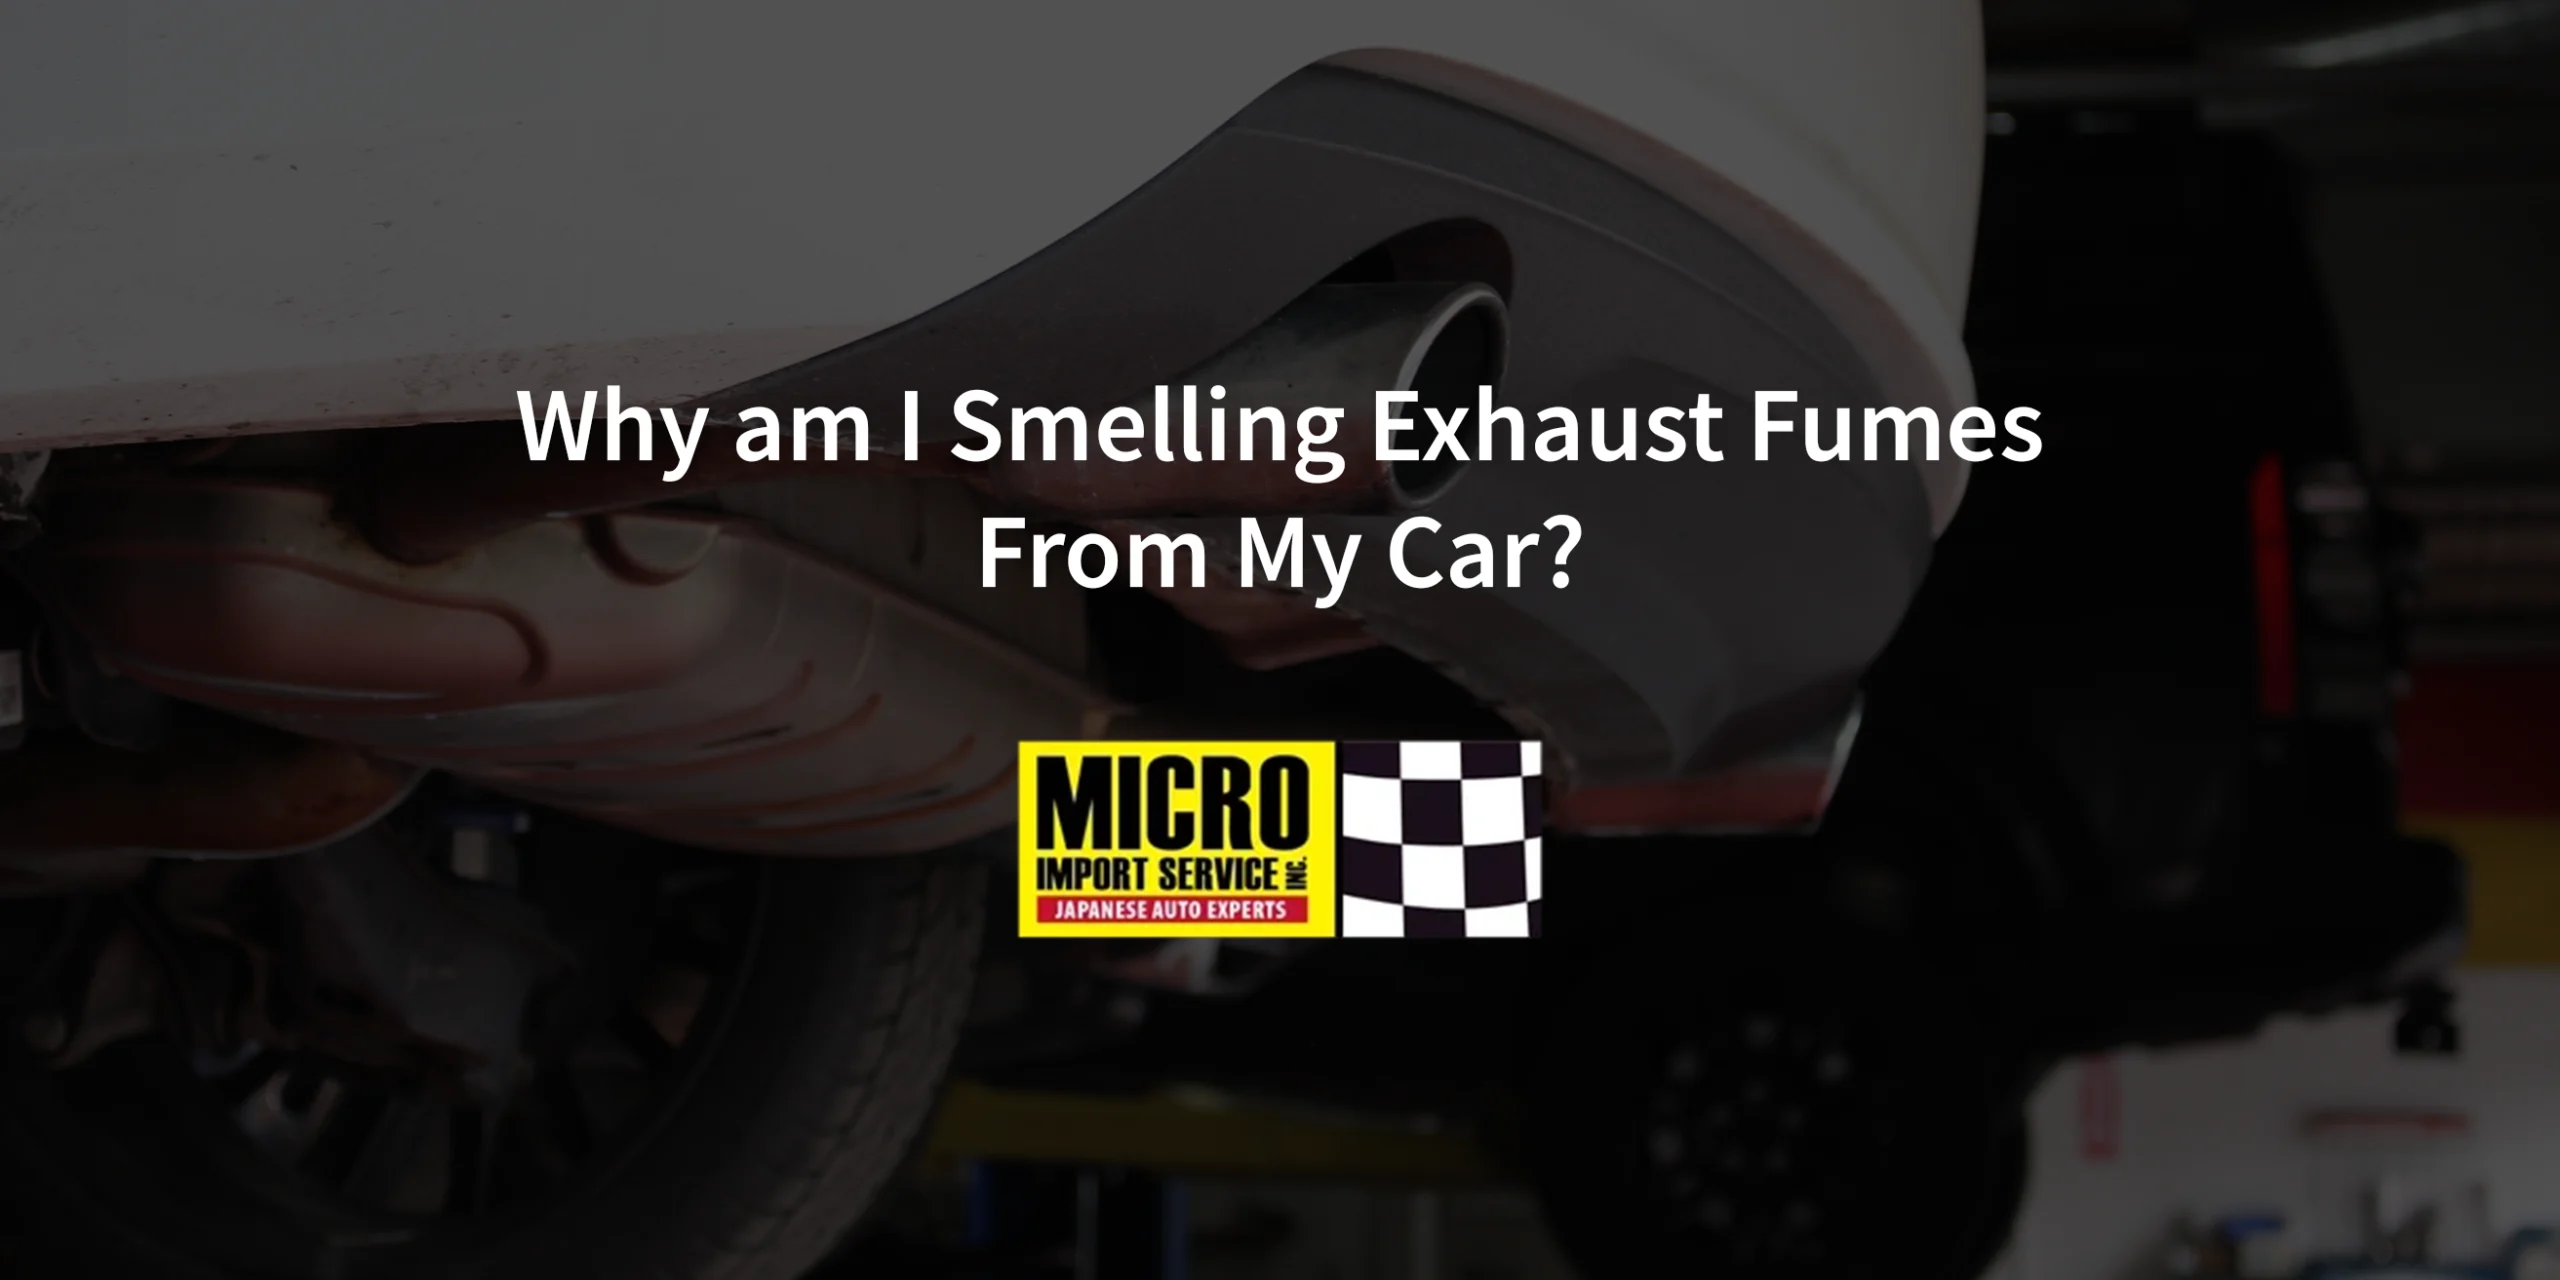 Why am I Smelling Exhaust Fumes From My Car?